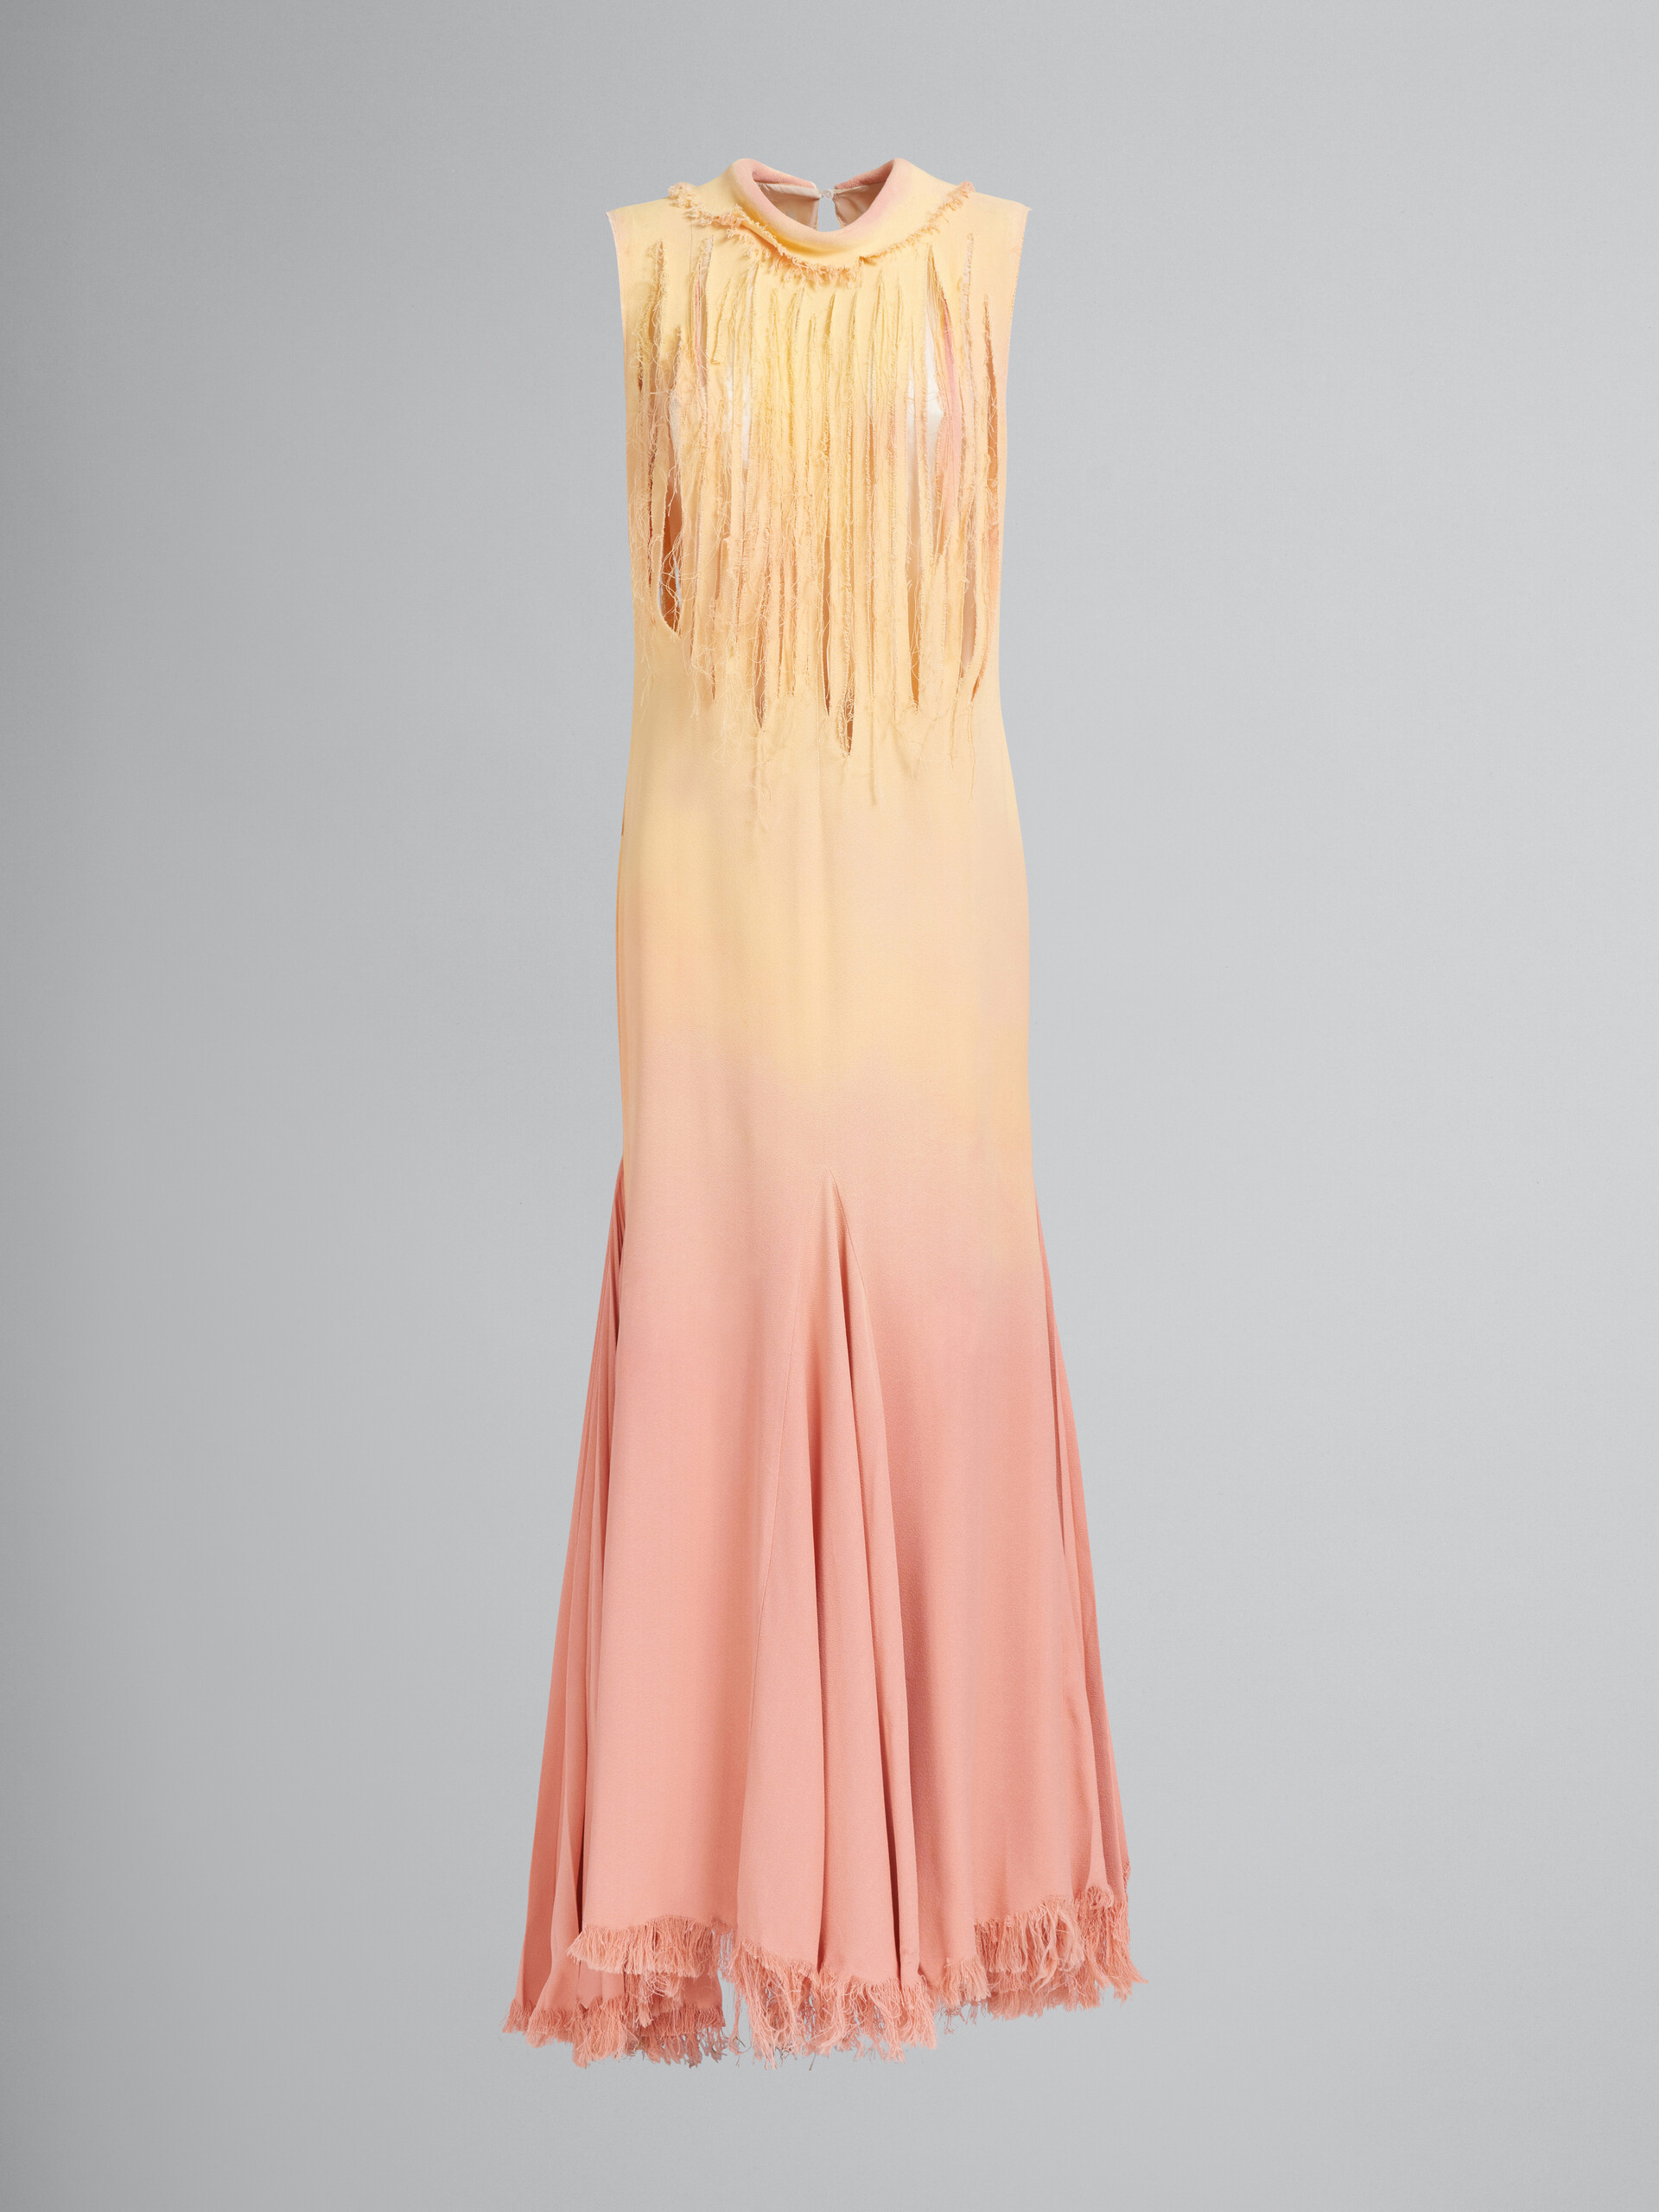 Pink and yellow mermaid dress with slashes - Dresses - Image 1